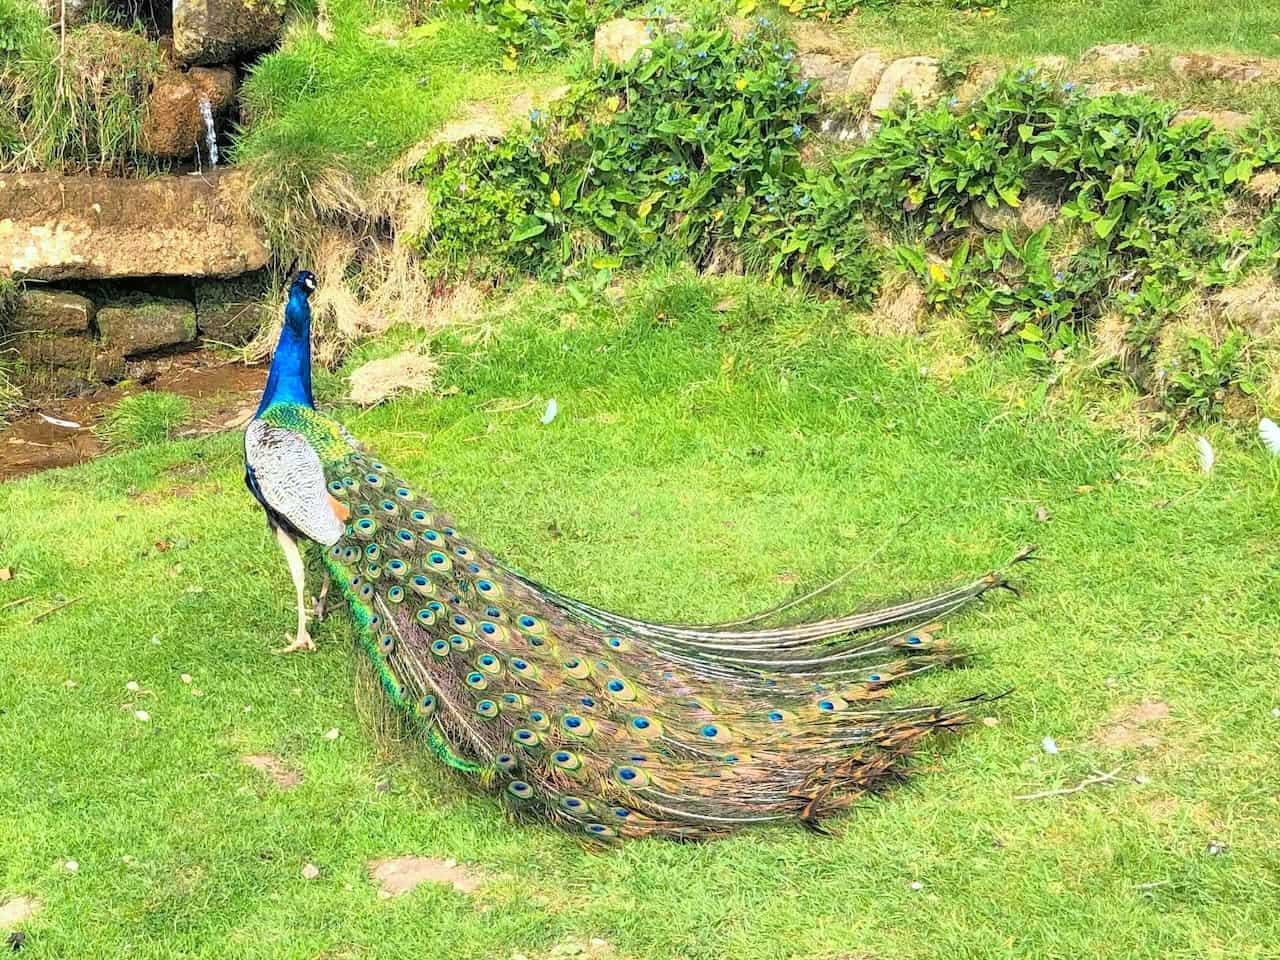 Peacock by the side of the Esk Valley Walk at Blackmires.